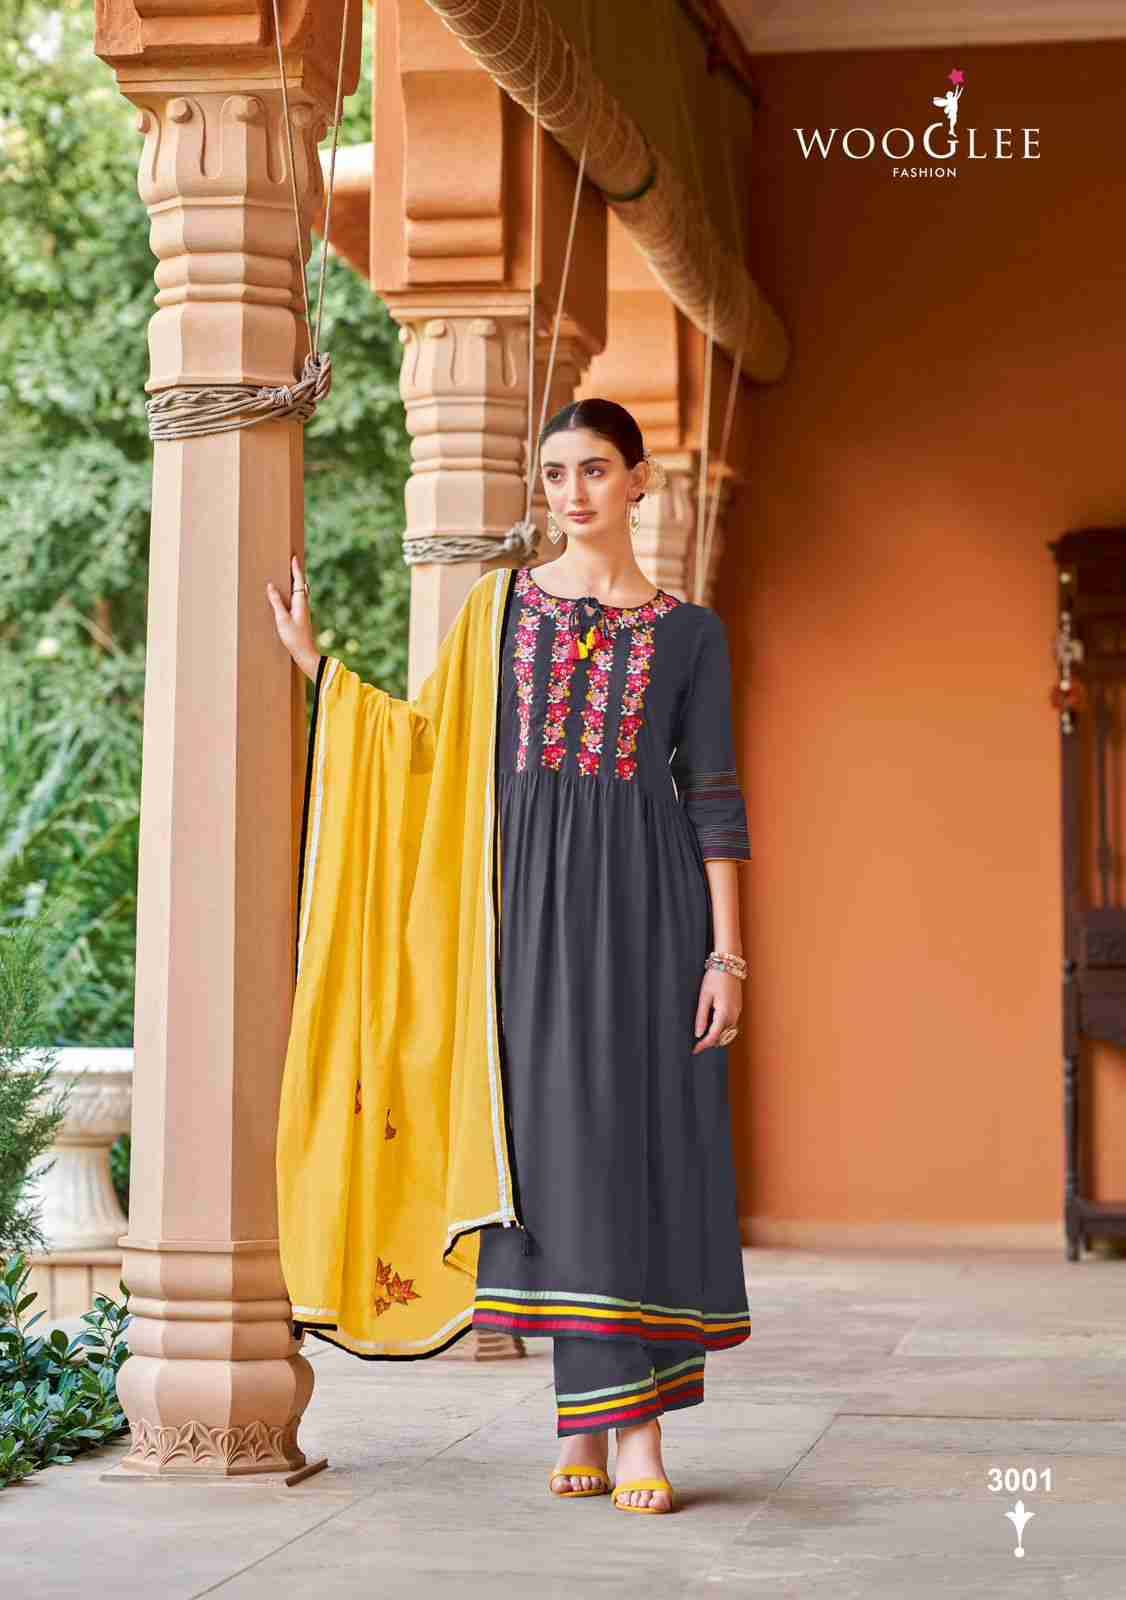 Kalyani By Wooglee 3001 To 3004 Series Beautiful Suits Colorful Stylish Fancy Casual Wear & Ethnic Wear Rayon Embroidery Dresses At Wholesale Price